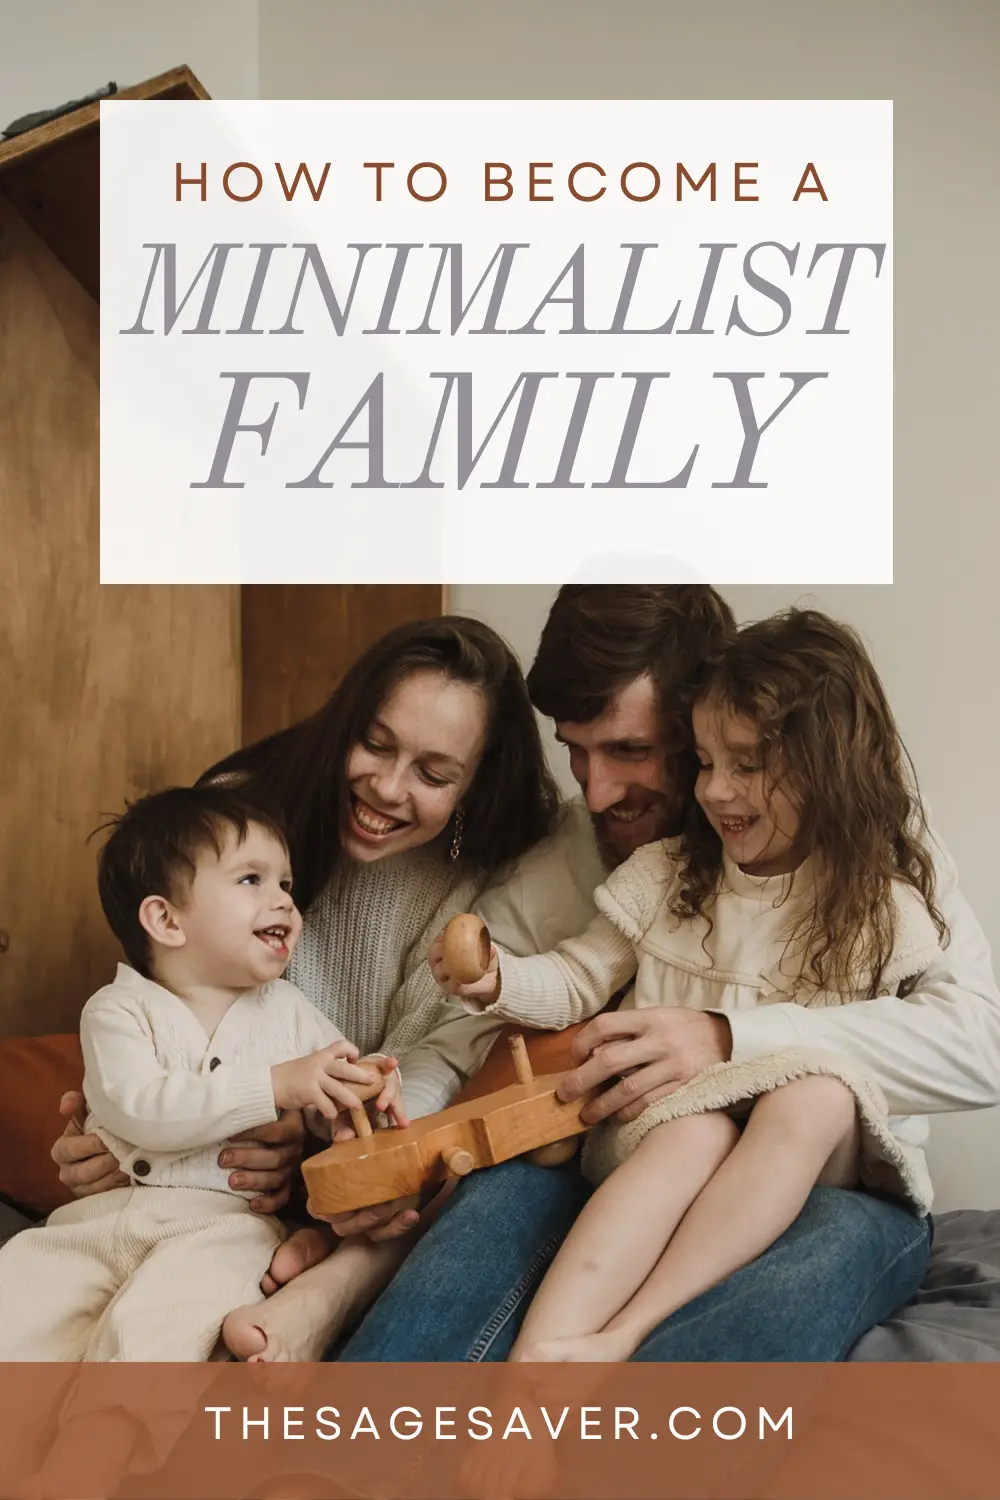 How to Become a Minimalist Family